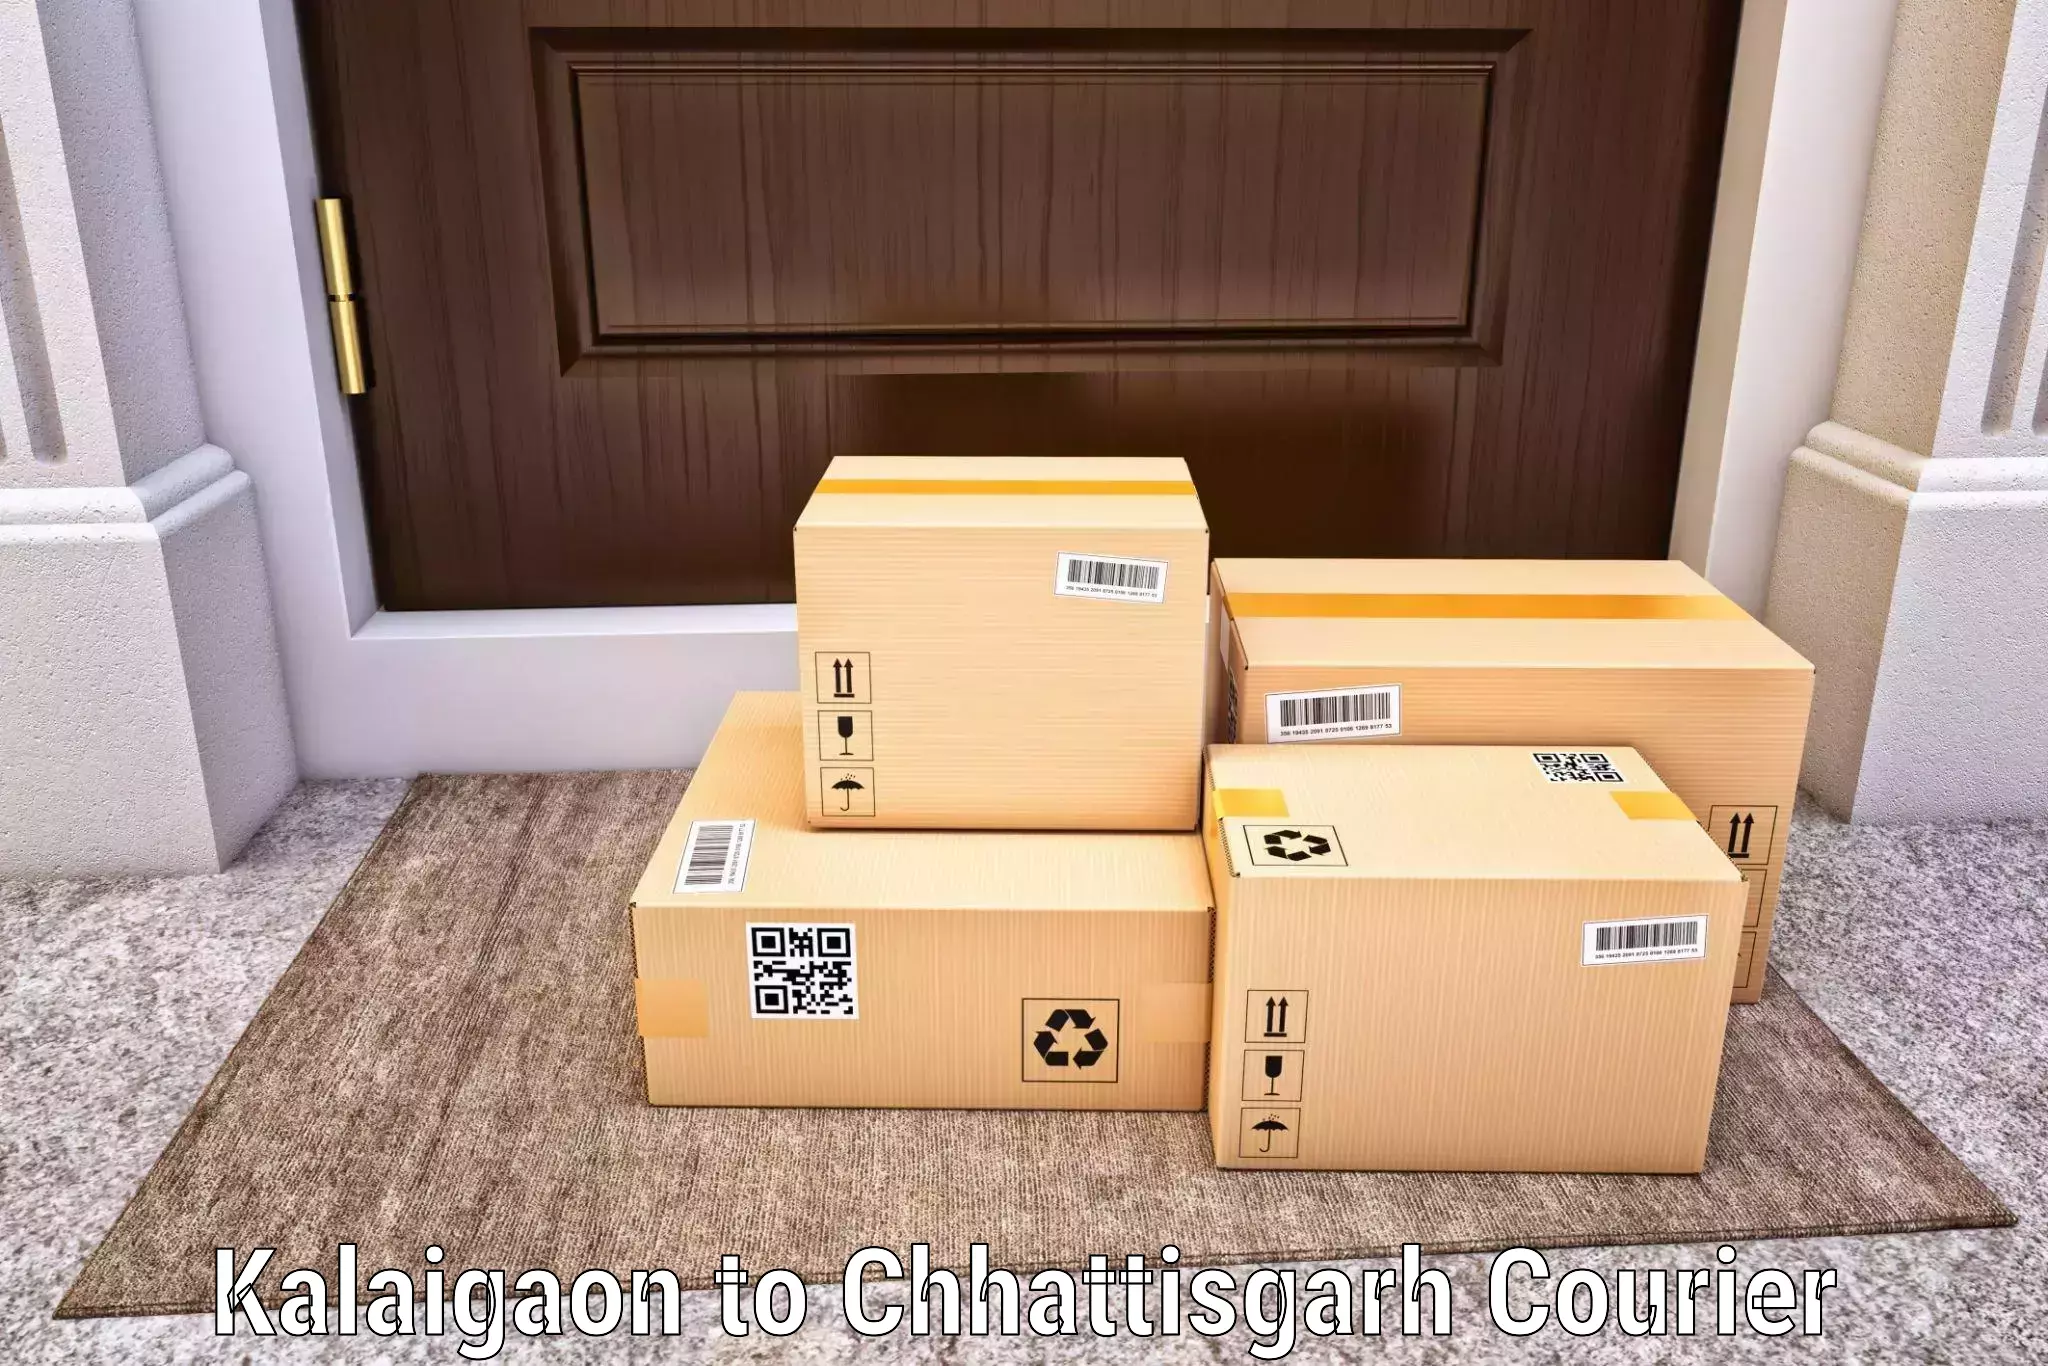 Express package delivery in Kalaigaon to Chhattisgarh